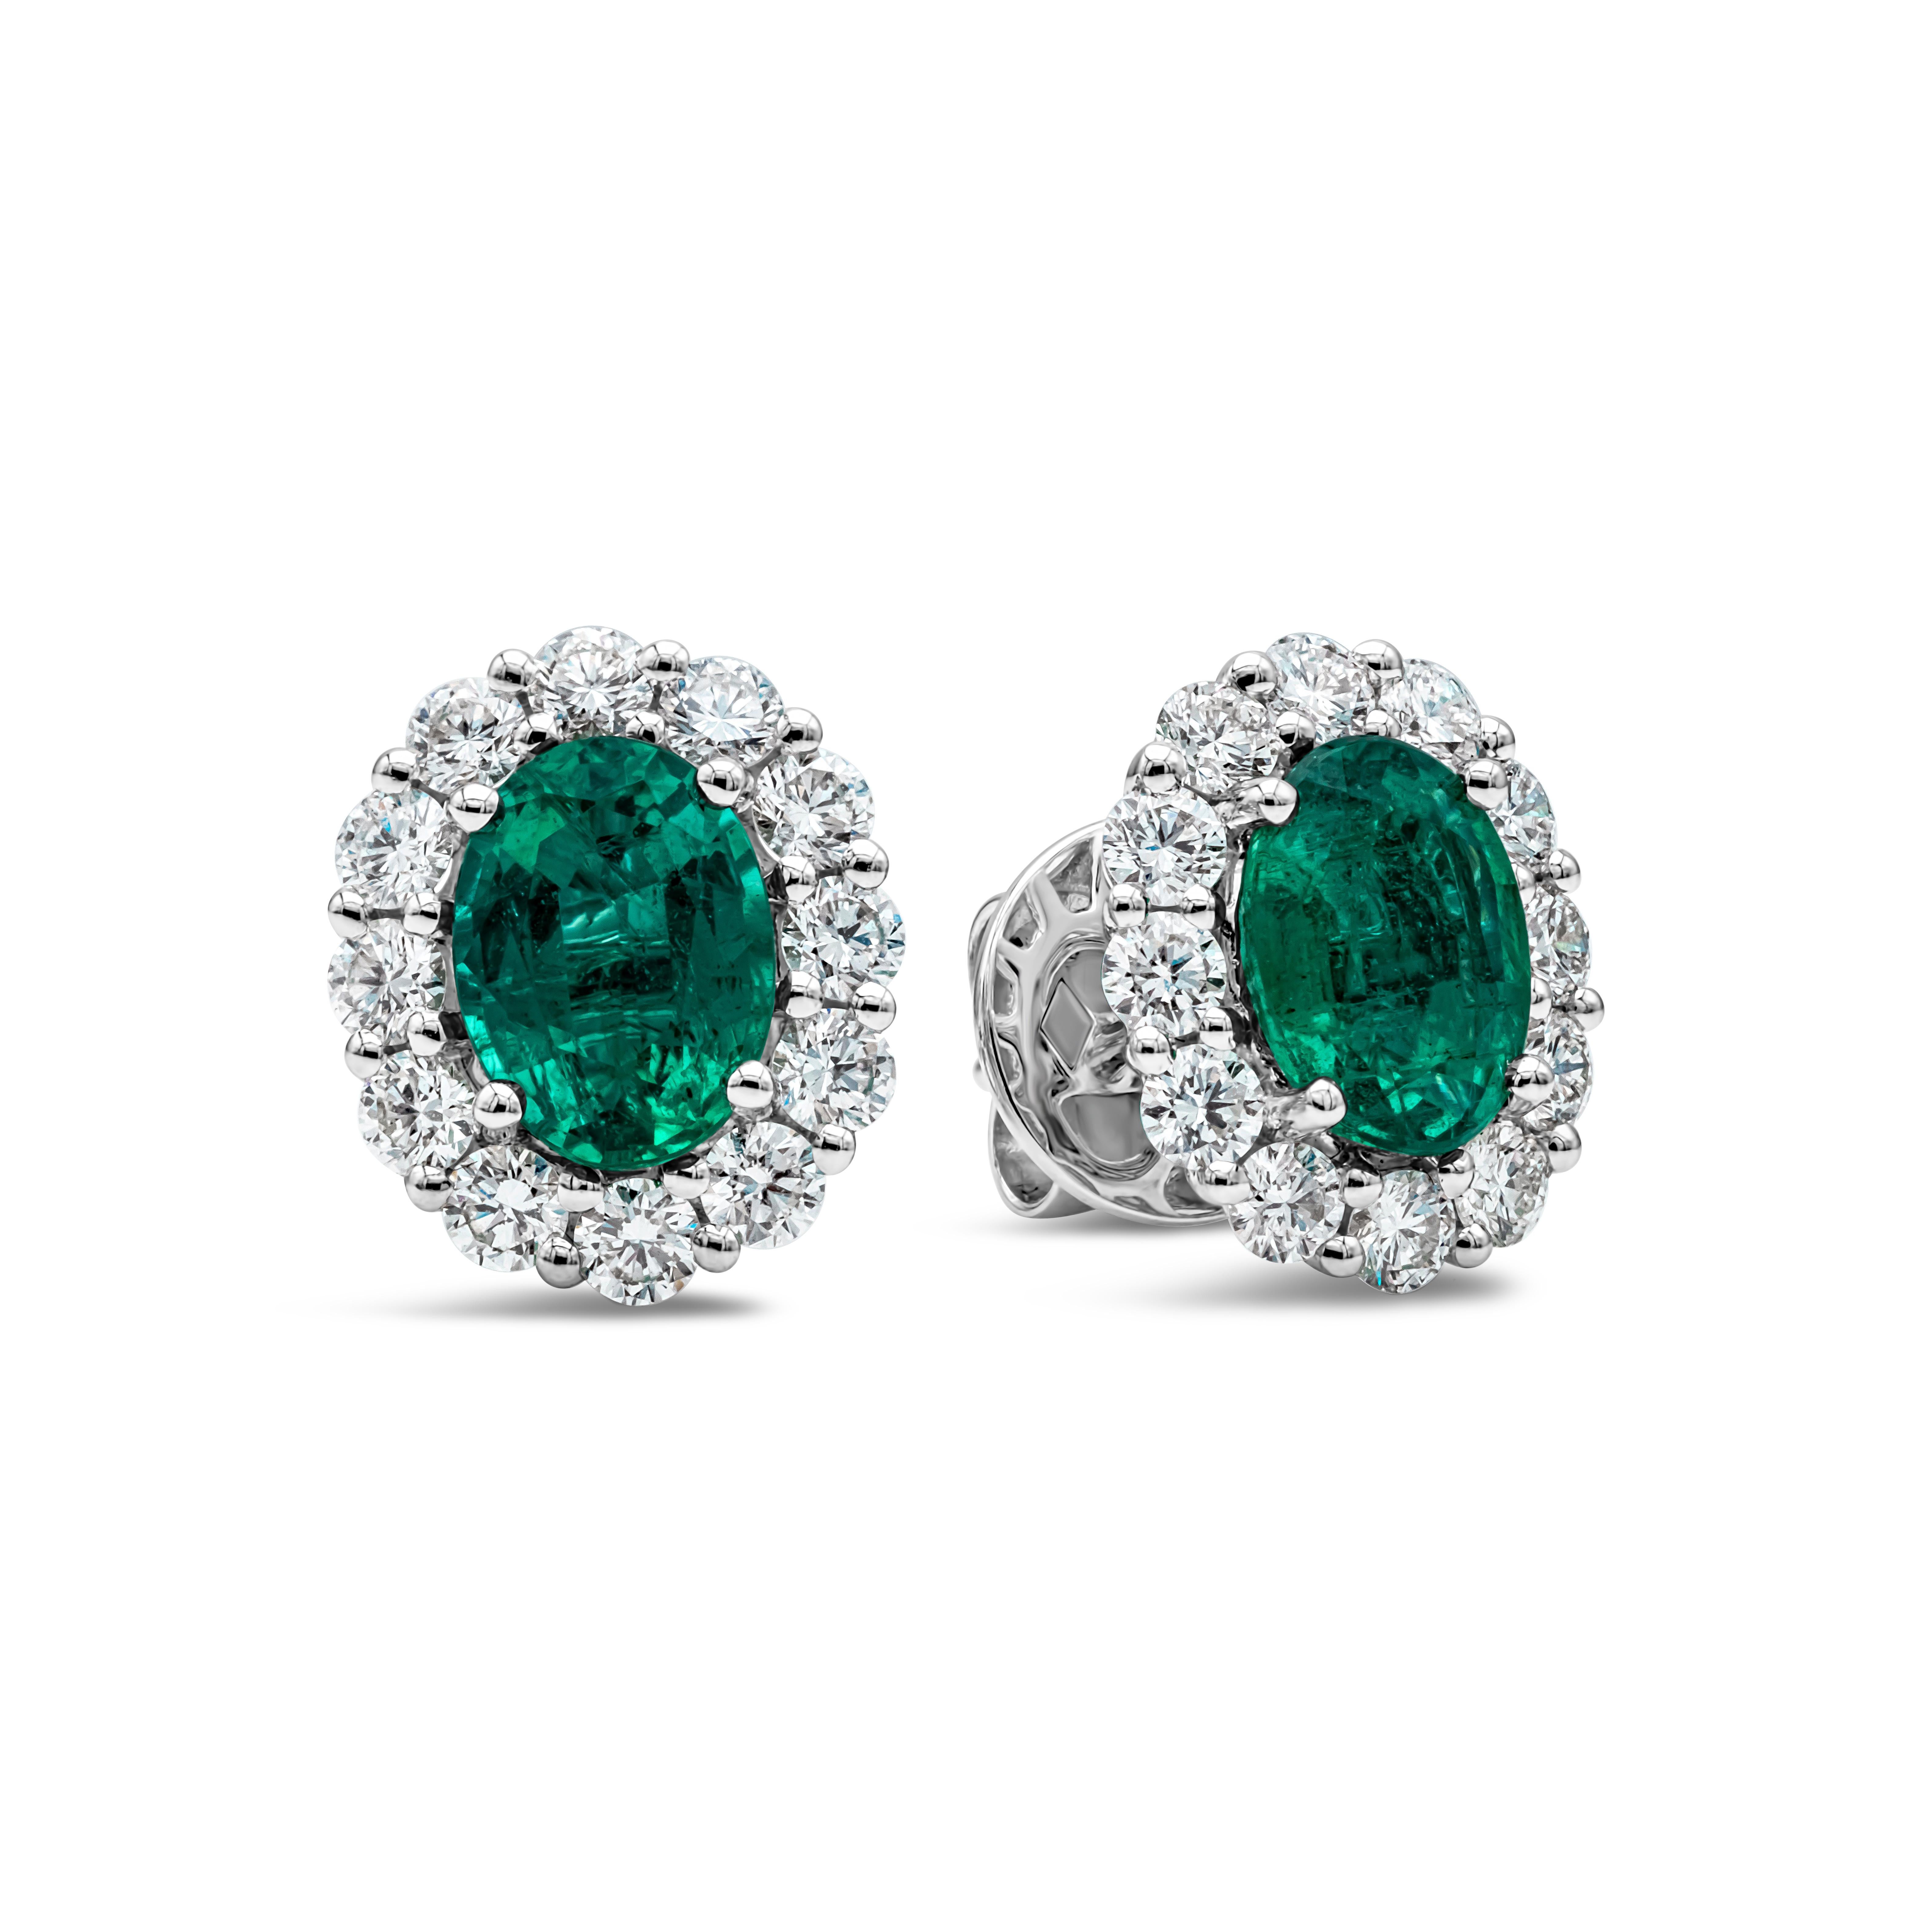 This beautiful pair of stud earrings showcases oval cut green emeralds weighing 2.18 carats total. Each emerald is surrounded by a row of brilliant round diamonds weighing 1.21 carats total, G color, VS-SI in clarity. Made in 18k white gold.

Roman